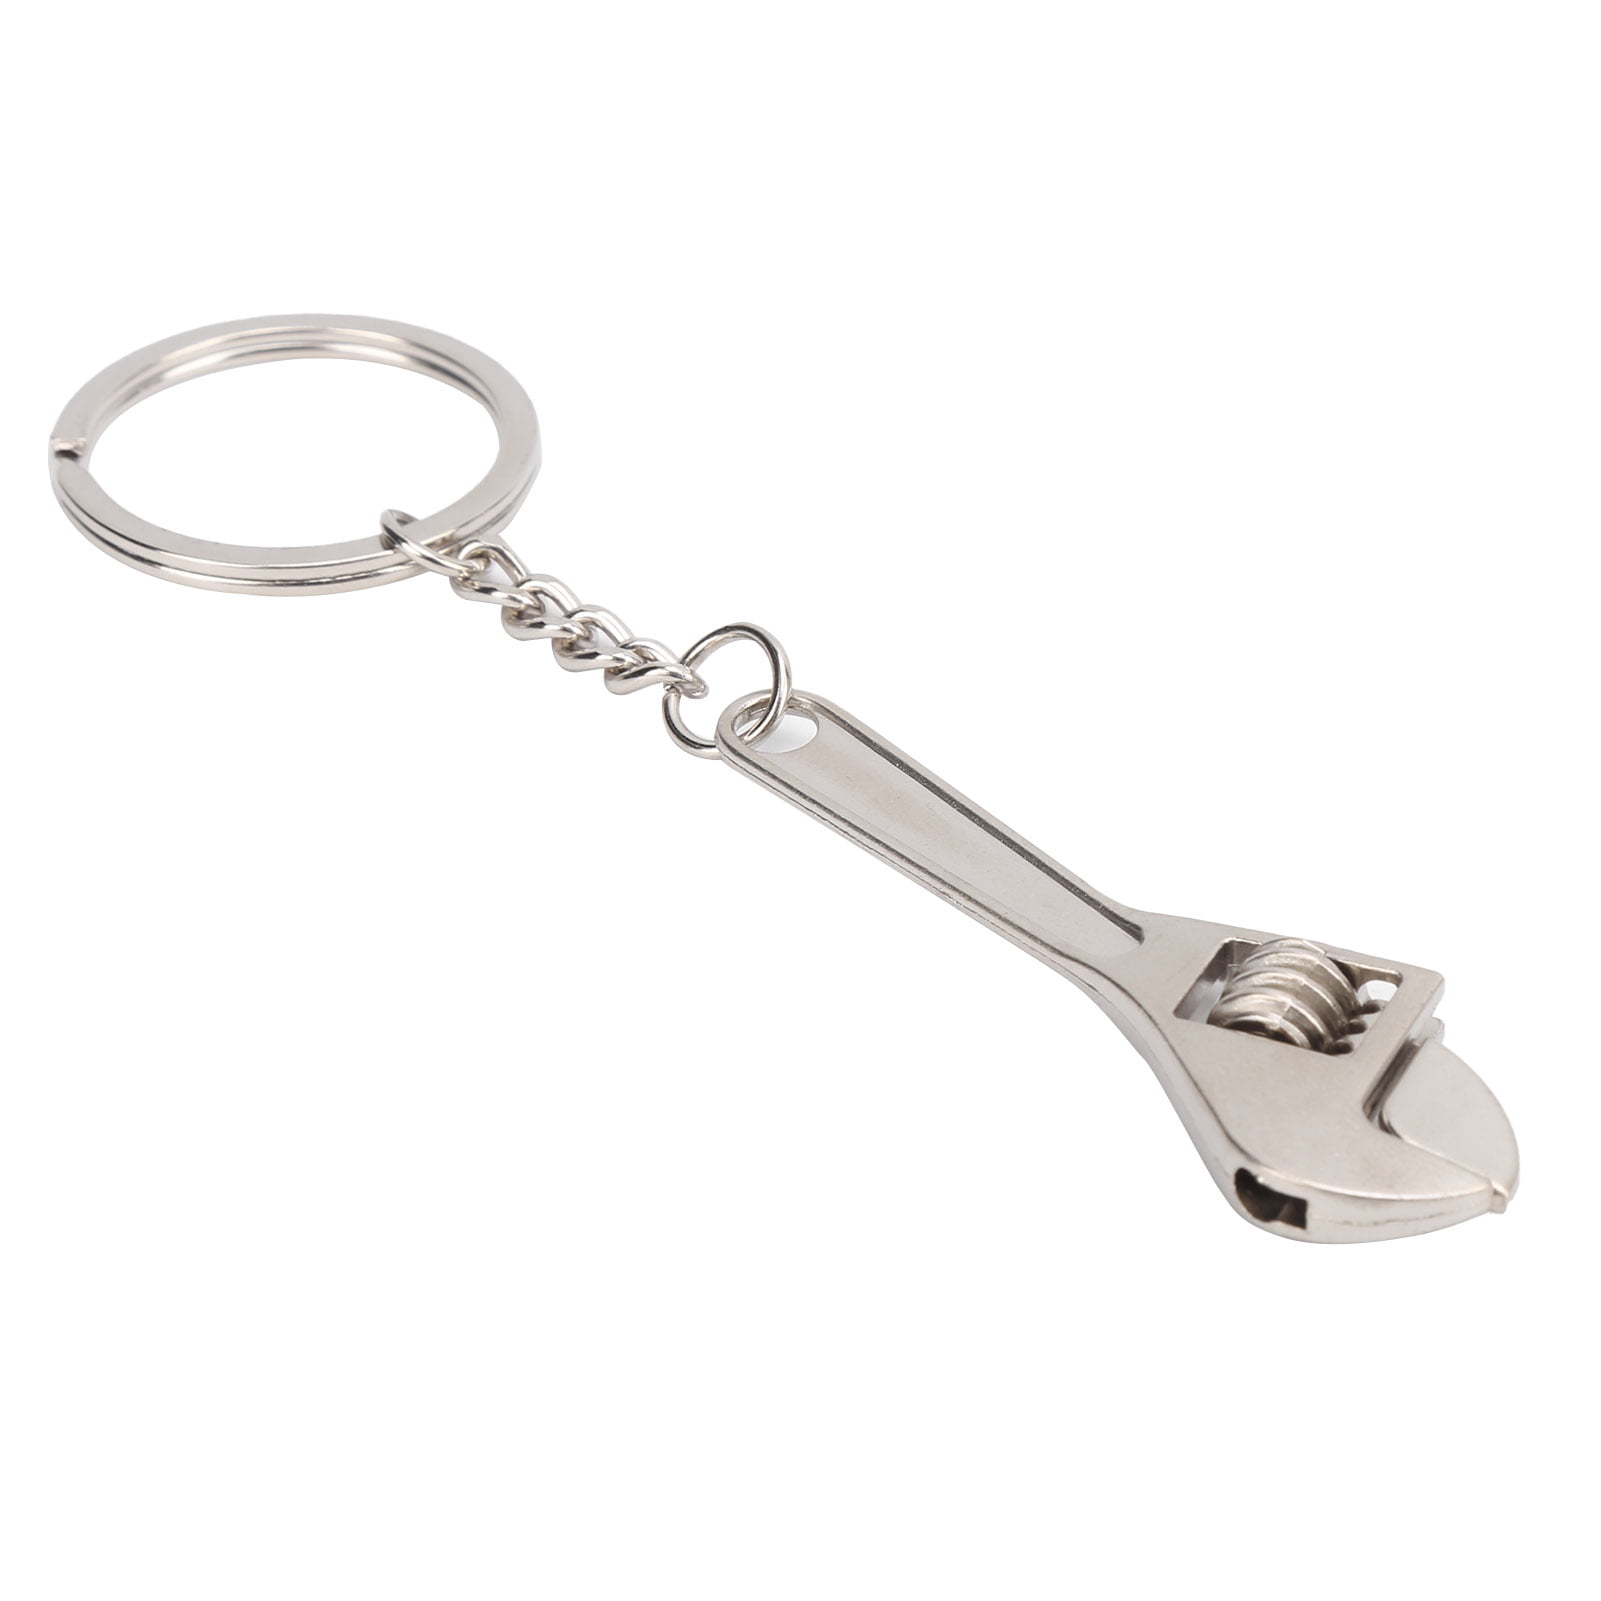 Details about   Tool Shaped Keychain Wrench Adjustable Spanner Zinc Alloy 